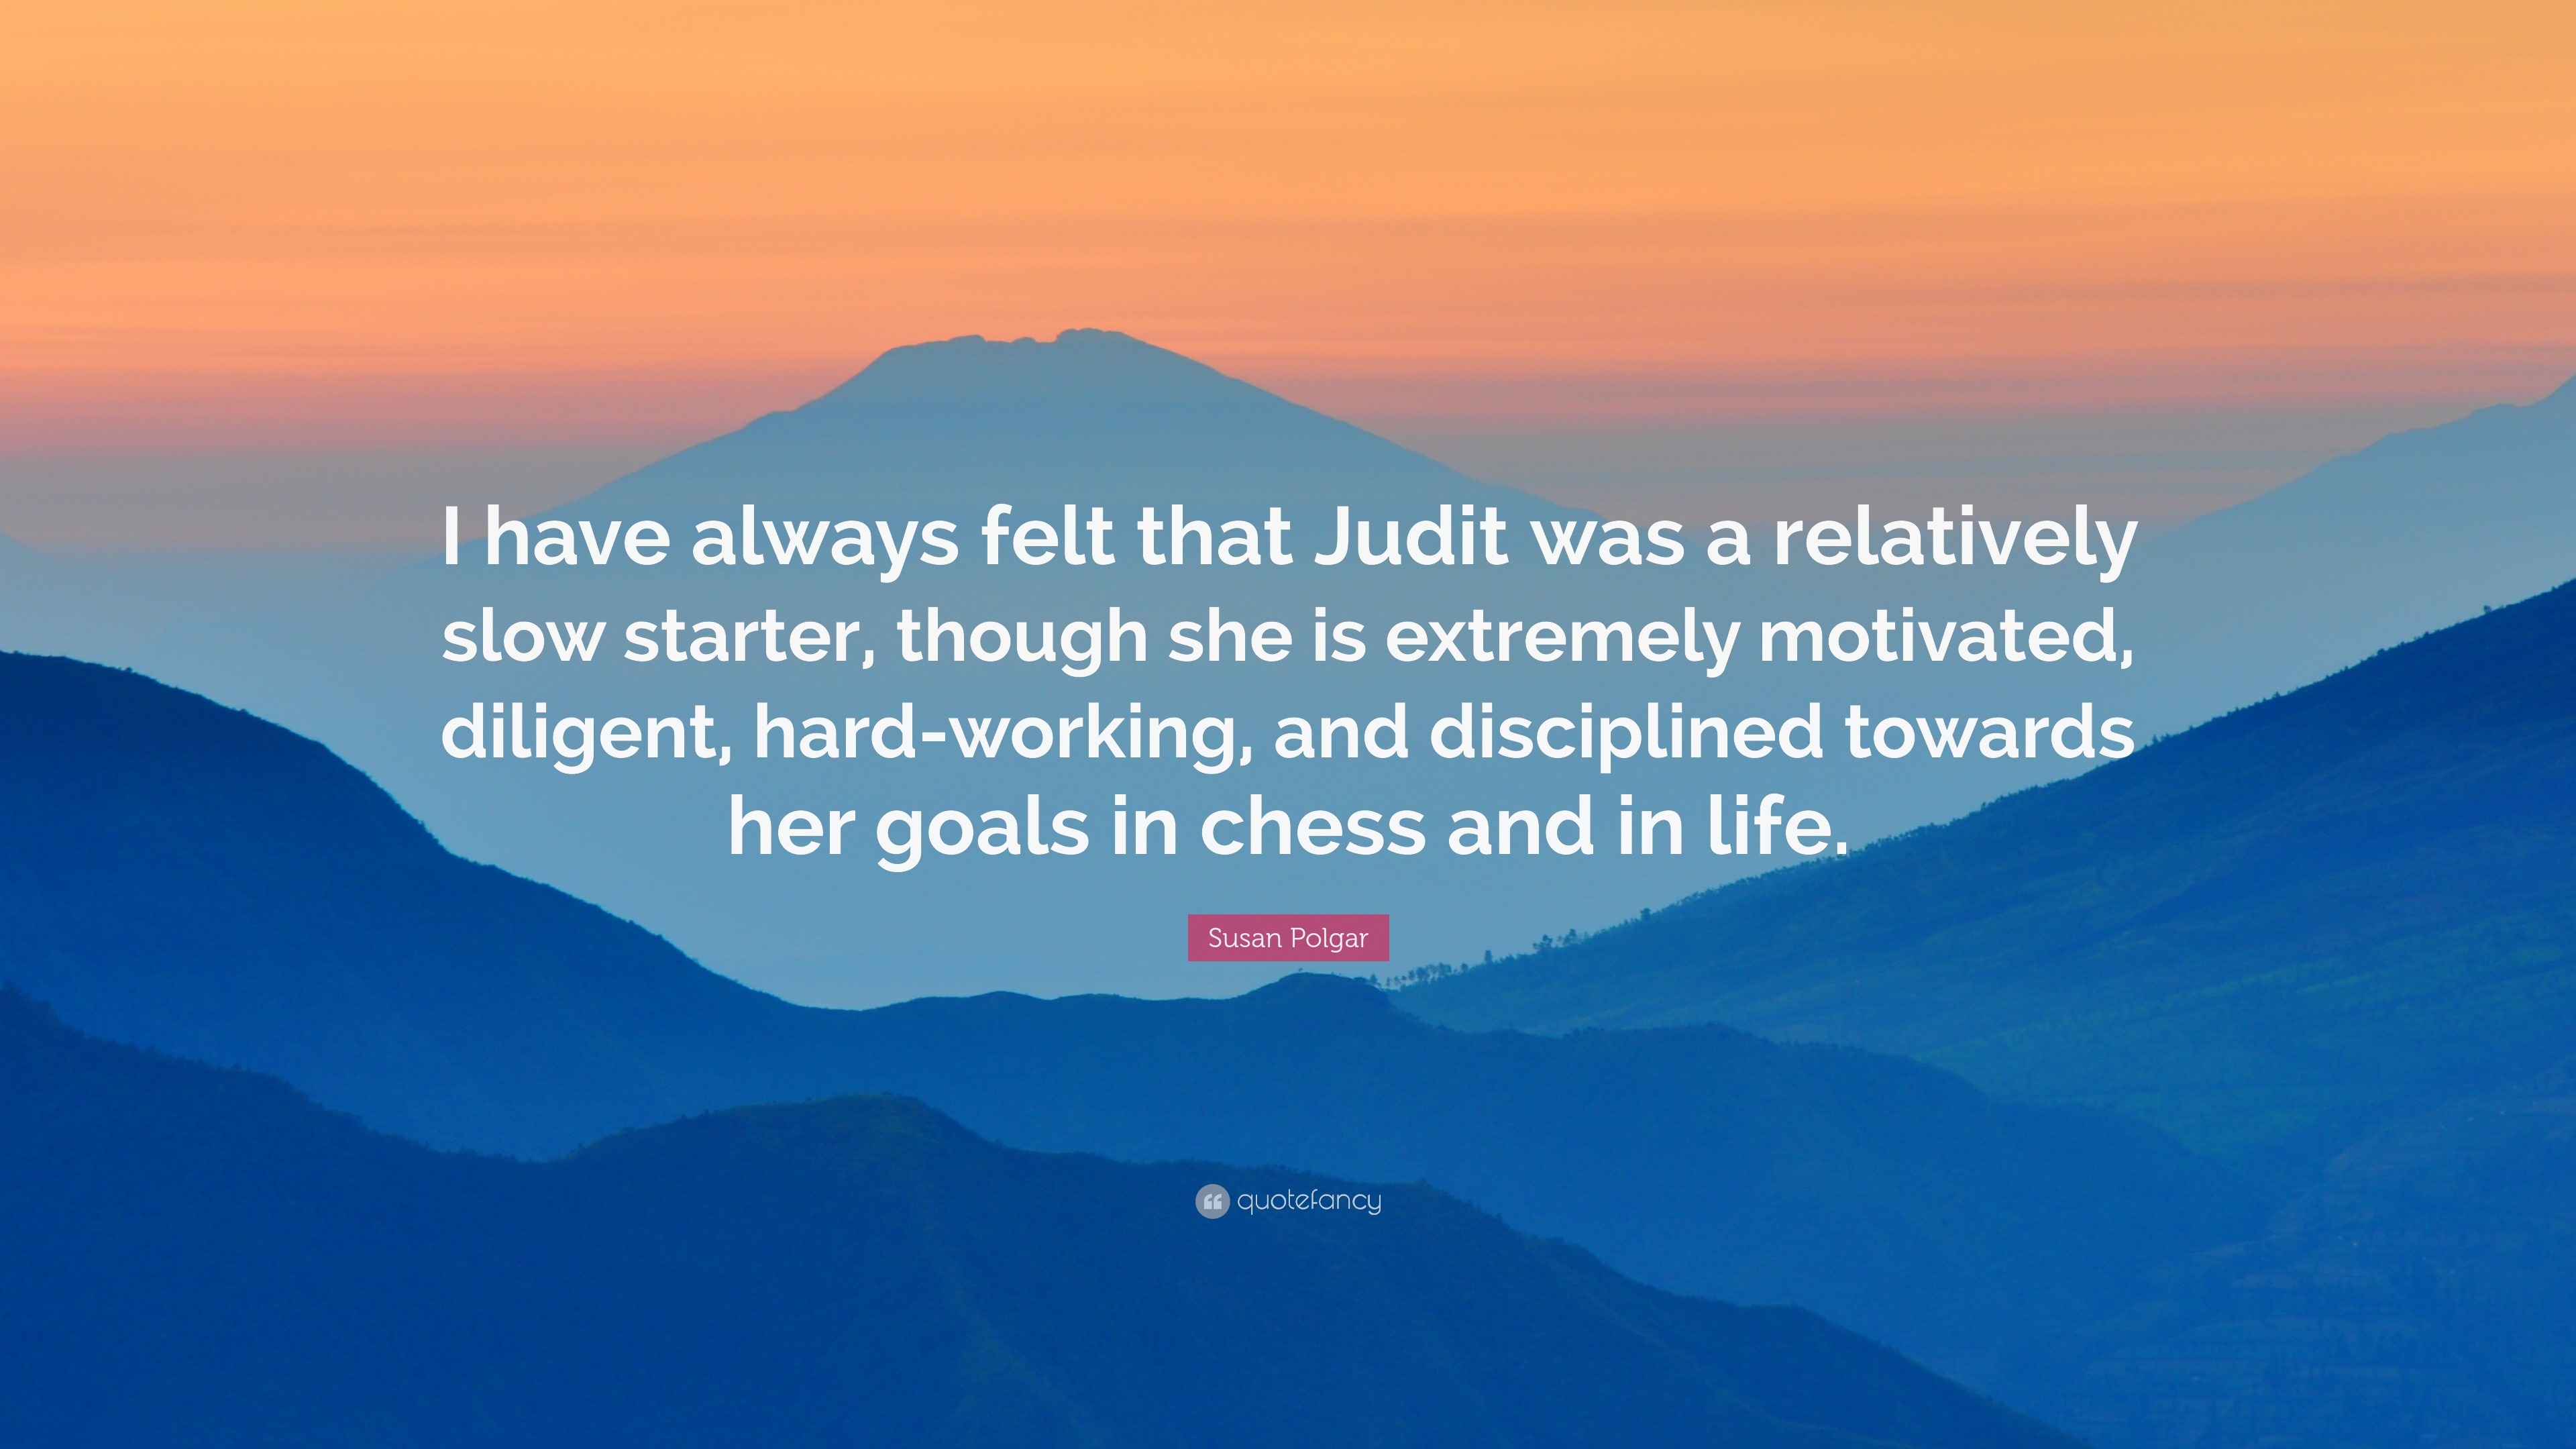 Susan Polgar quote: I have always felt that Judit was a relatively slow